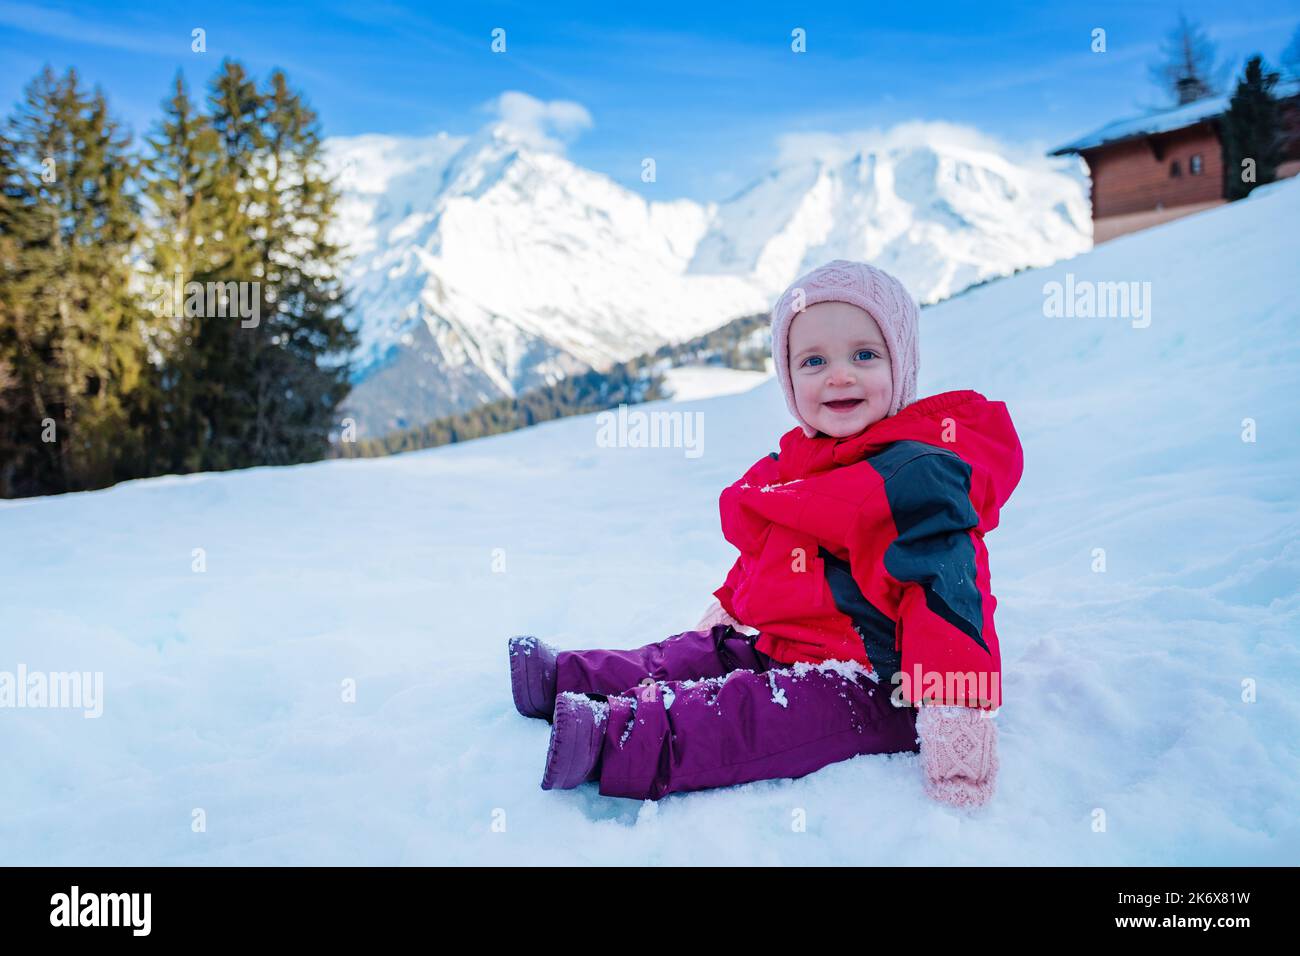 Profile view of a happy girl sit in snow wear winter outfit Stock Photo